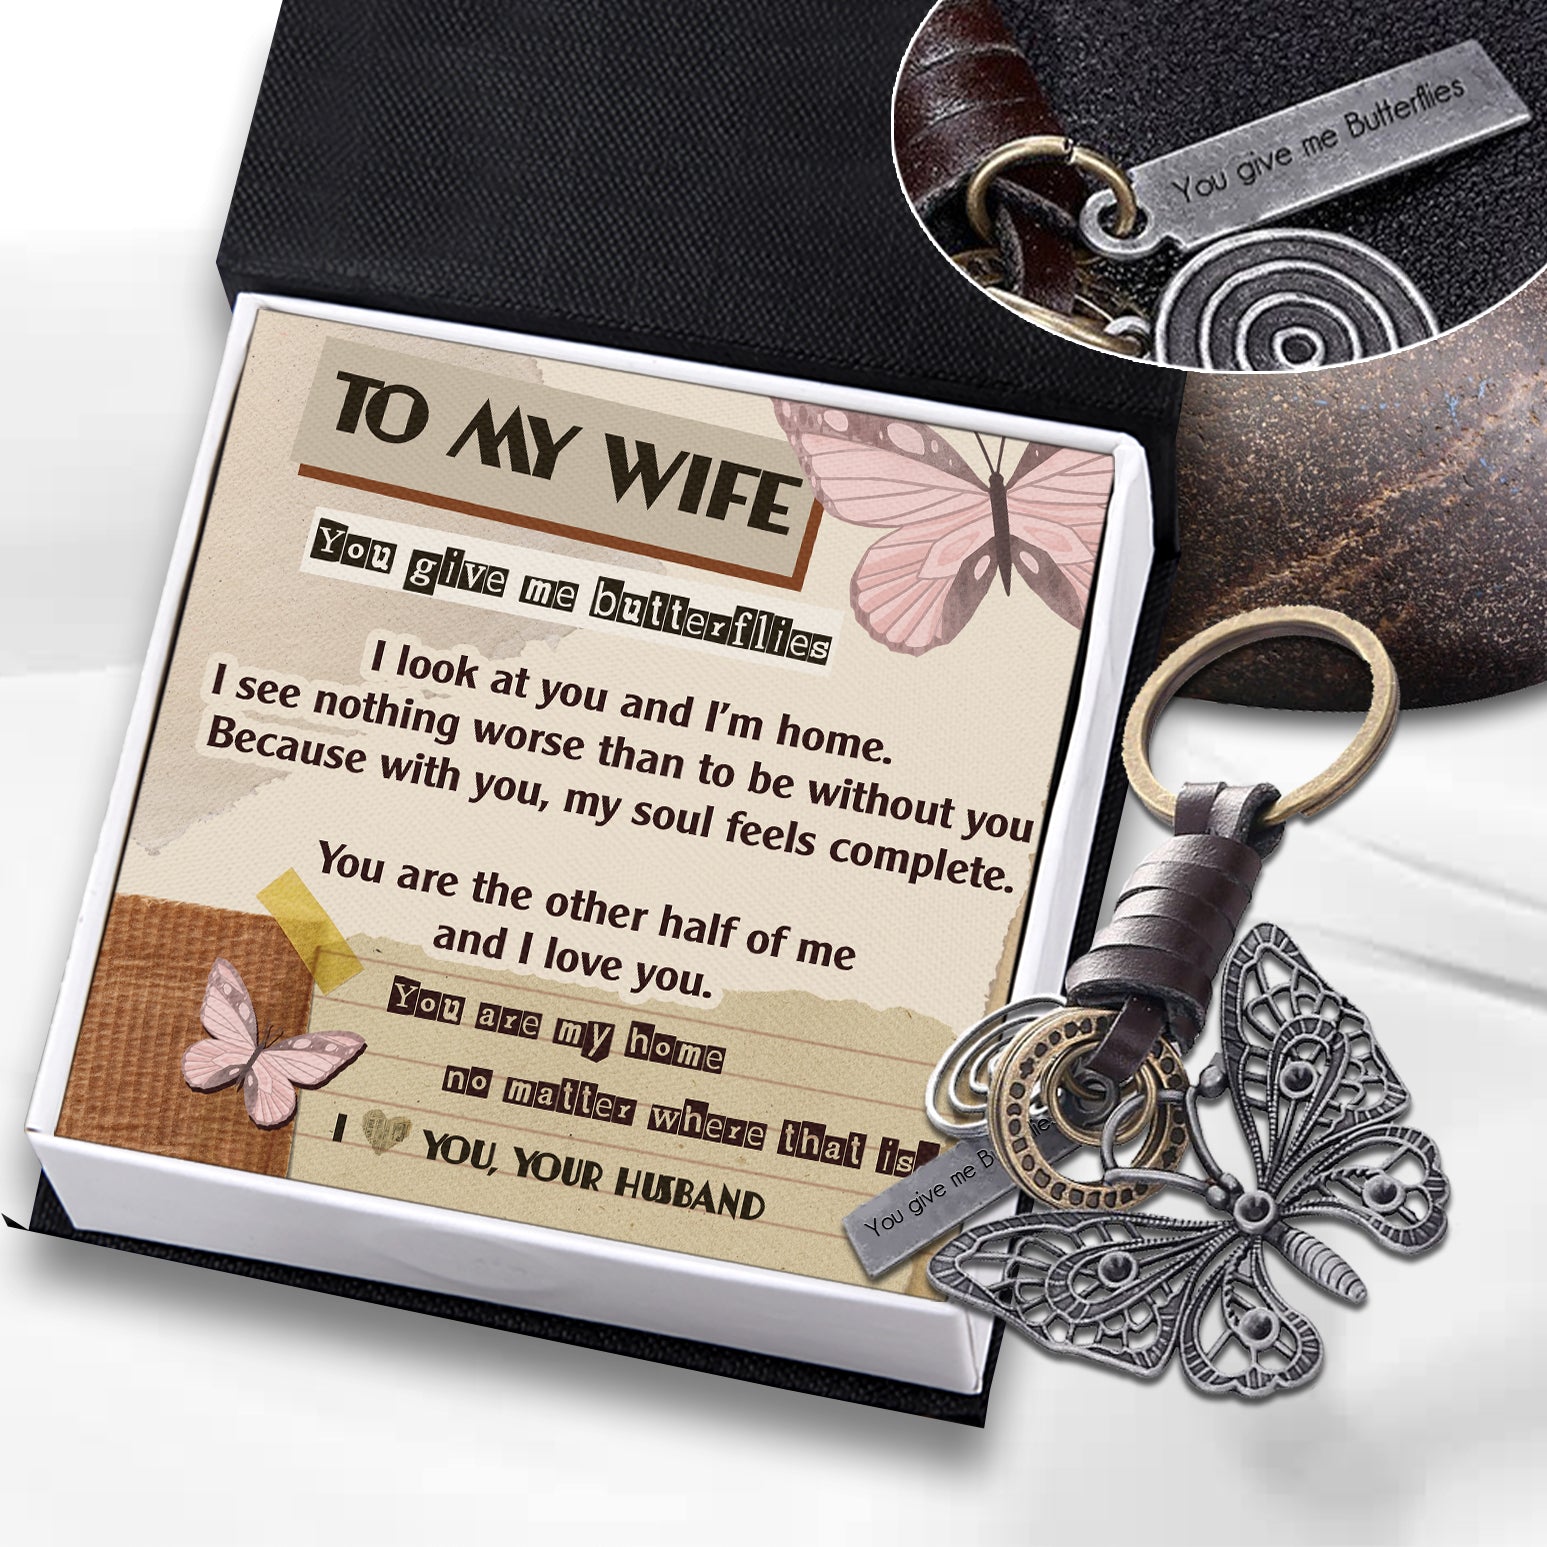 Butterfly Vintage Keychain - Butterfly - To My Wife - You Are The Other Half Of Me And I Love You - Ukgkwc15002